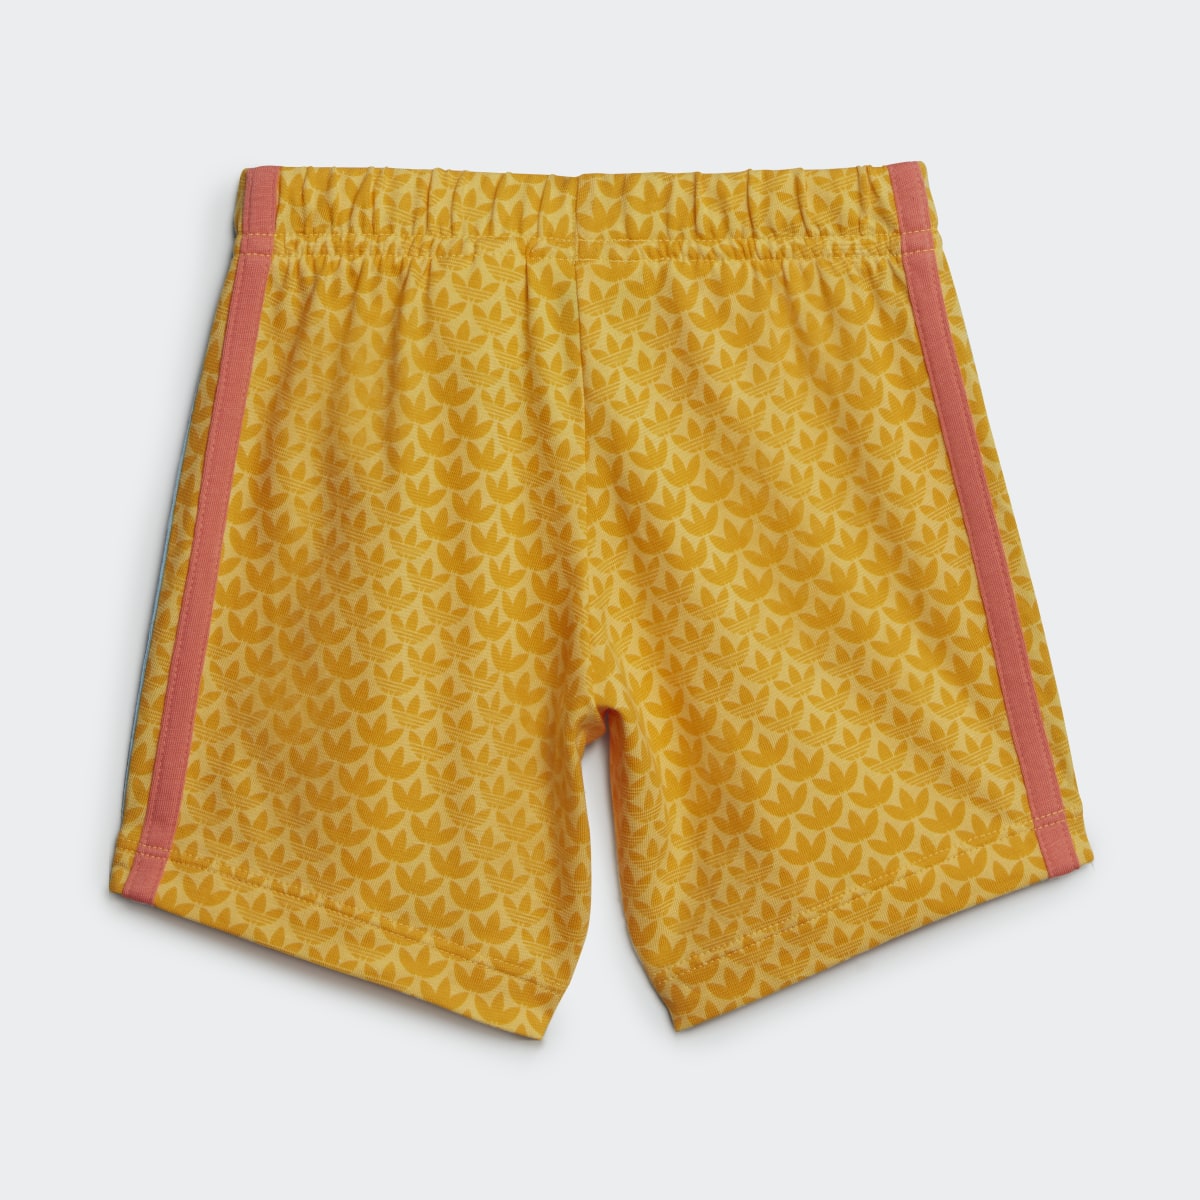 Adidas Completo Graphic Print Shorts and Tee. 6